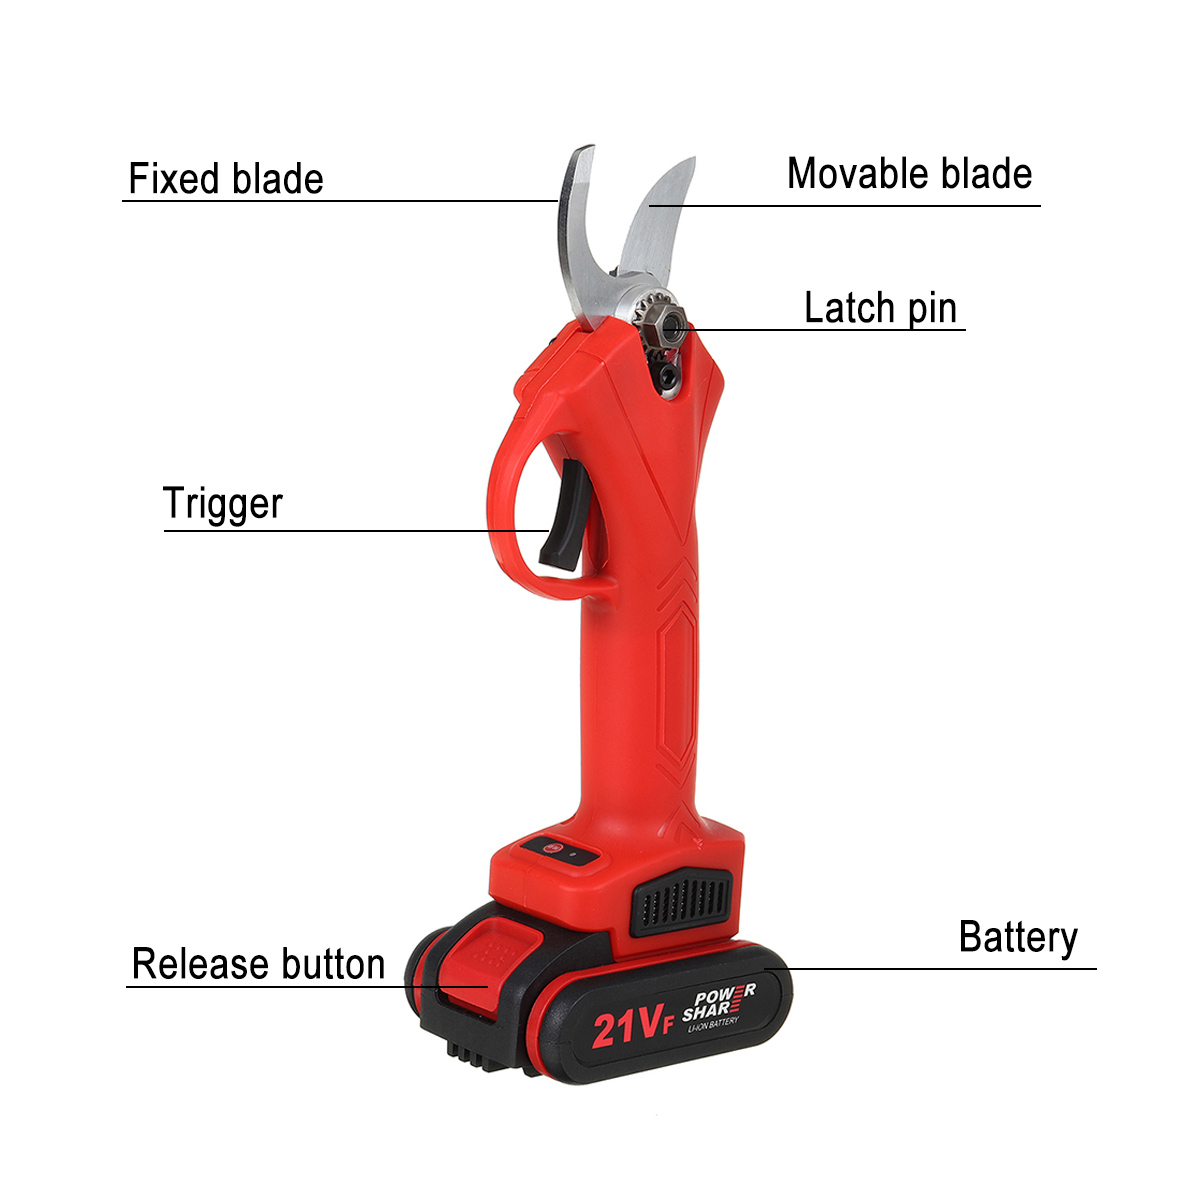 21V-Wireless-25mm-Rechargeable-Electric-Scissors-Branch-Pruning-Shear-Tree-Cutting-Tools-W-1-Battery-1749245-5